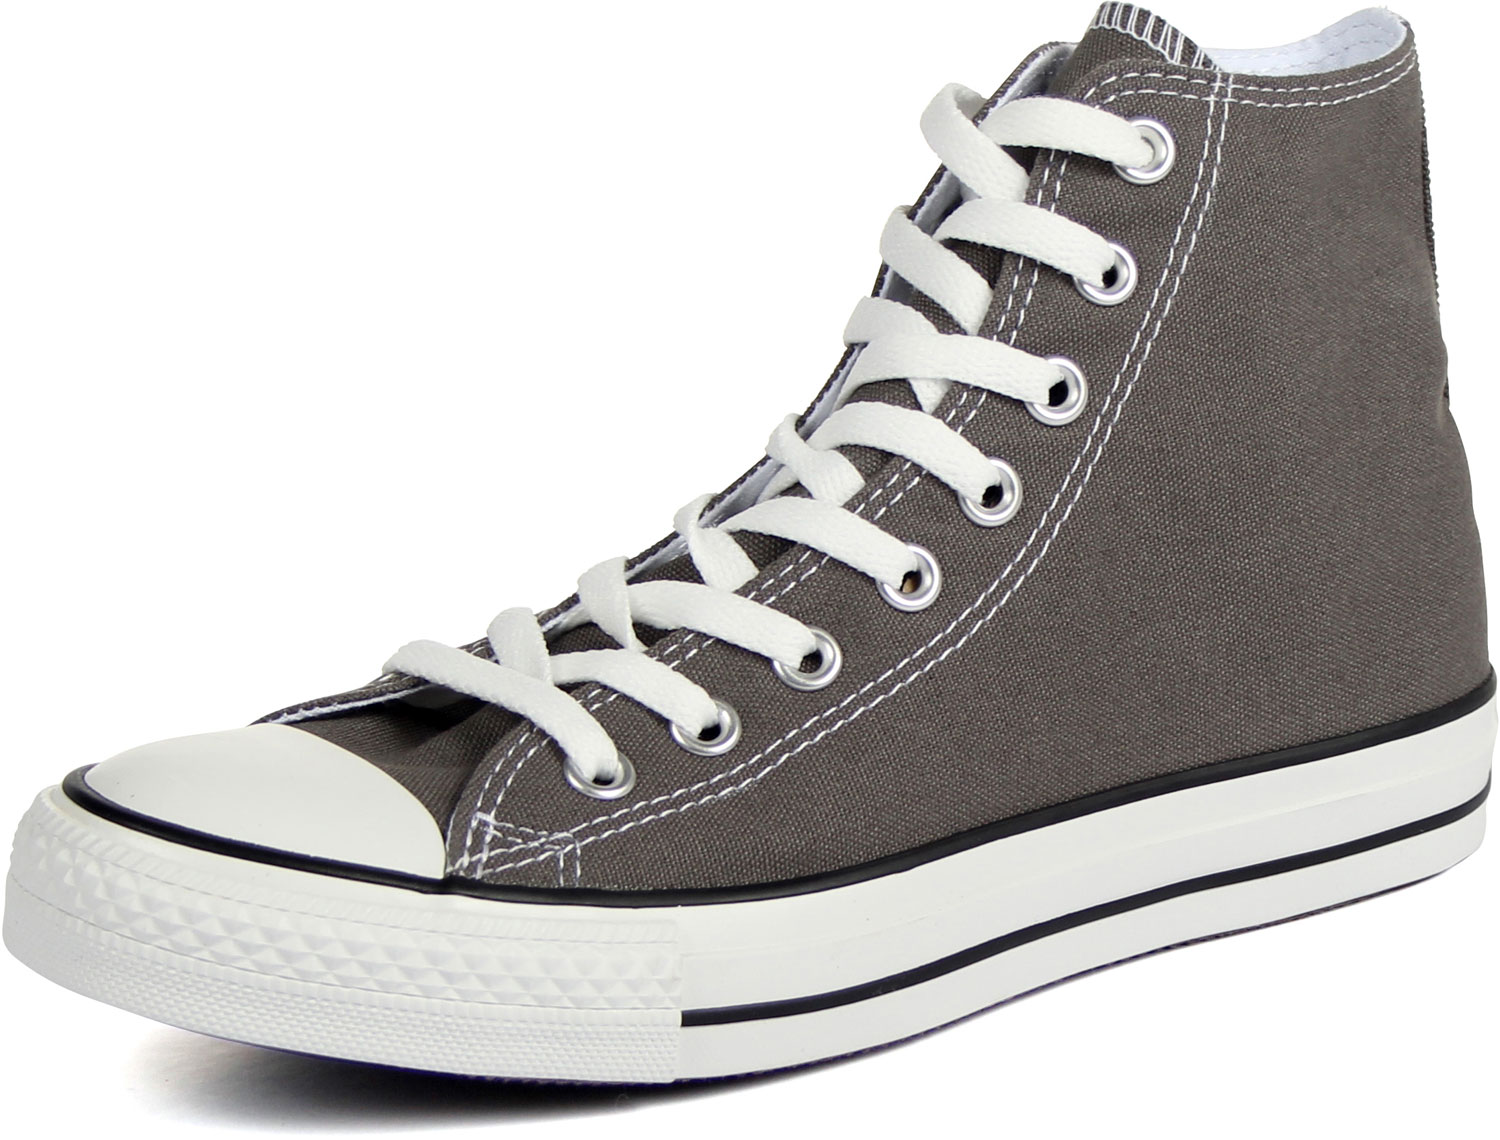 Converse Chuck Taylor All Star Shoes (1J793) Hi Top in Charcoal